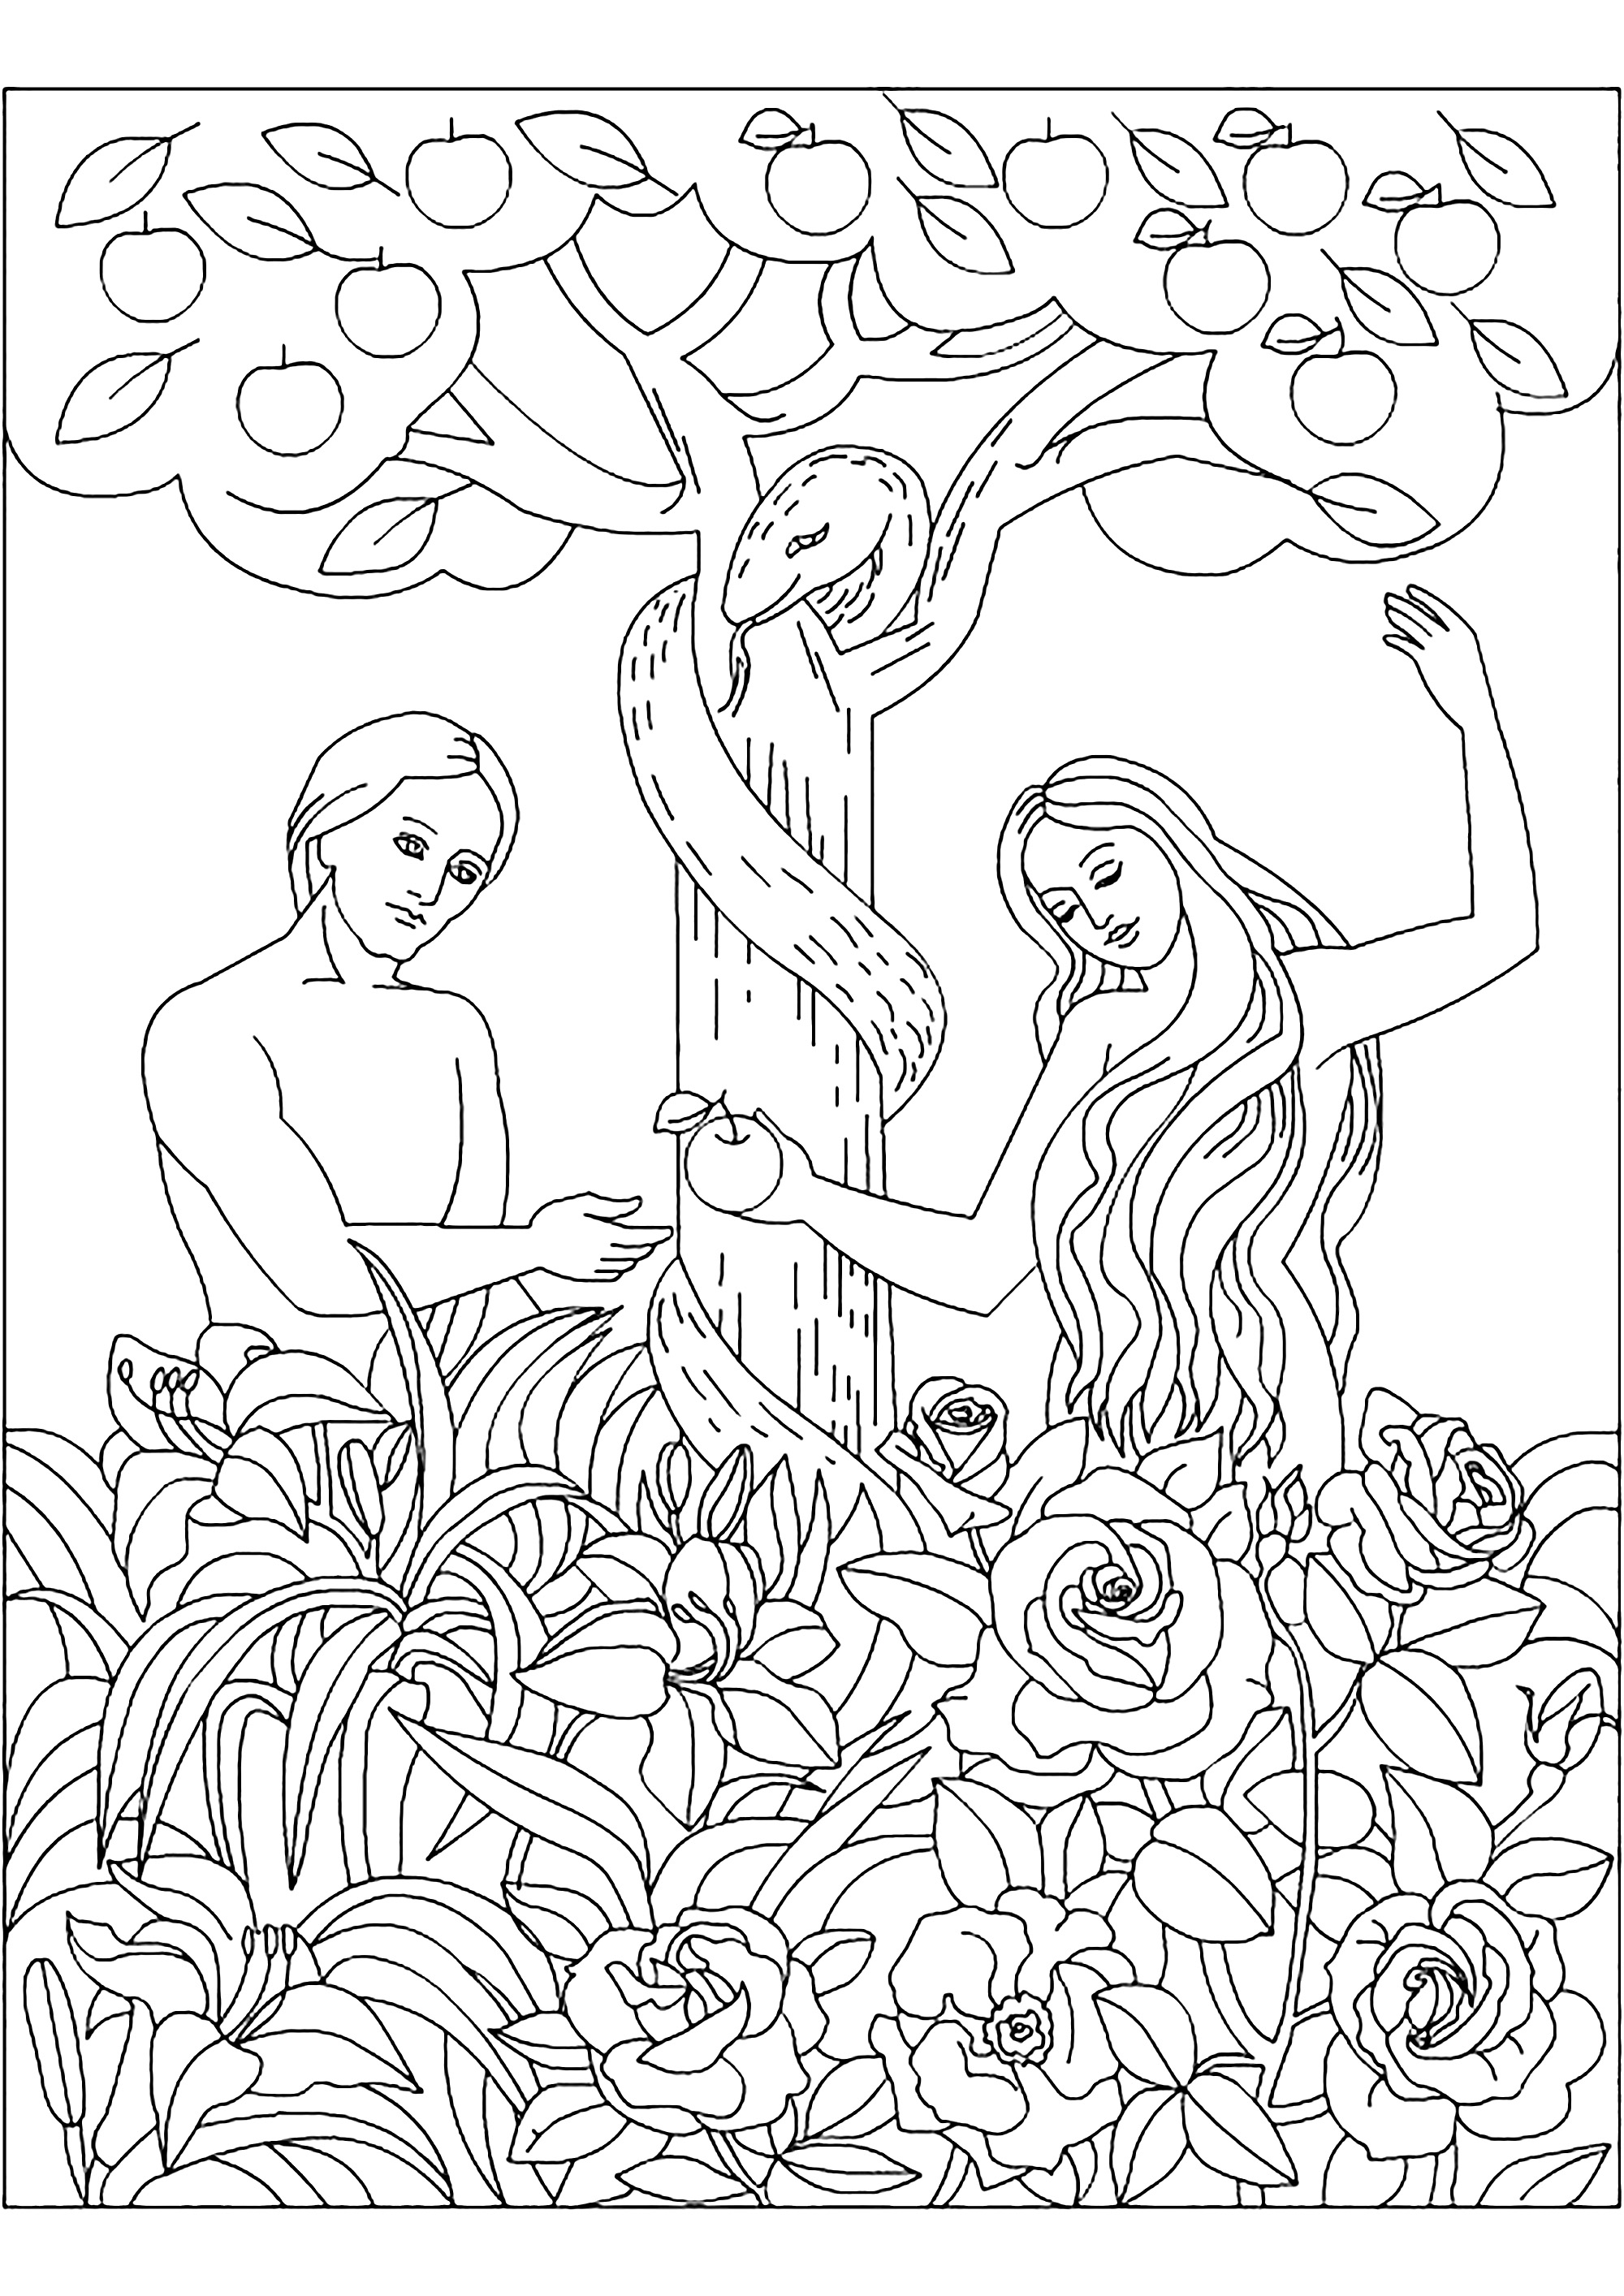 Adam and Eve coloring page. Color Adam, Eve, the snake and the famous apple